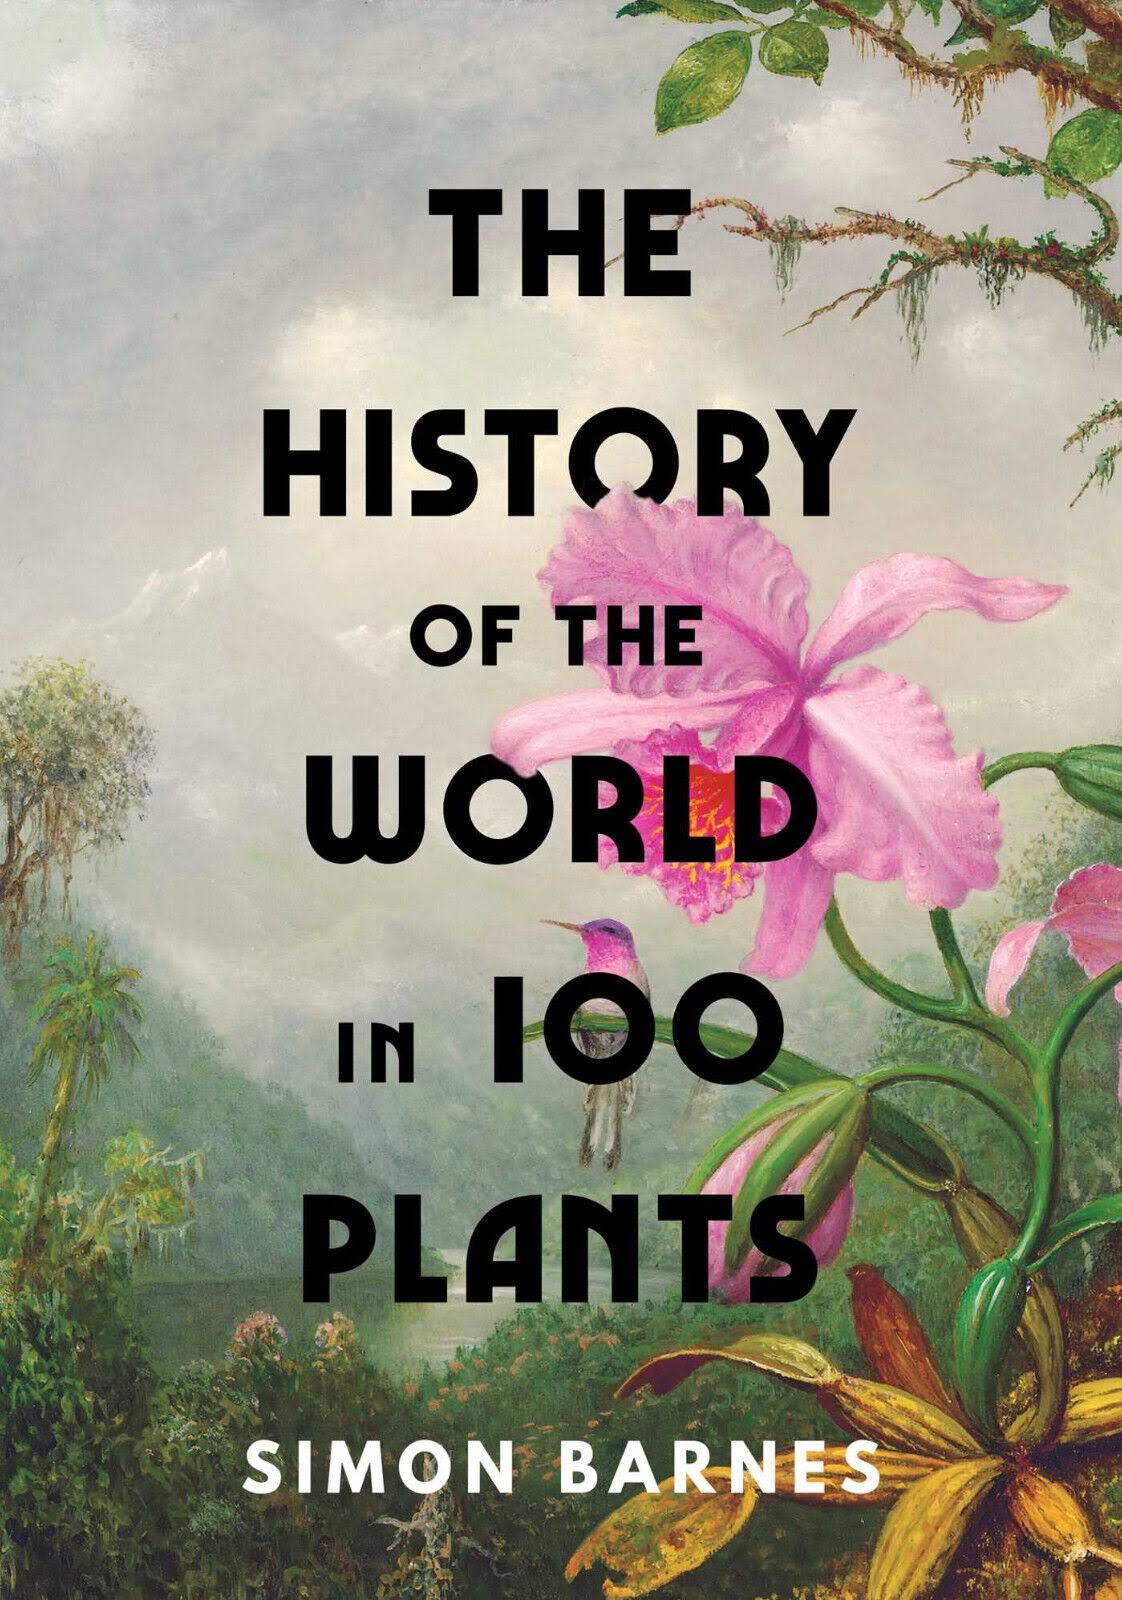 The History of the World in 100 Plants by Simon Barnes